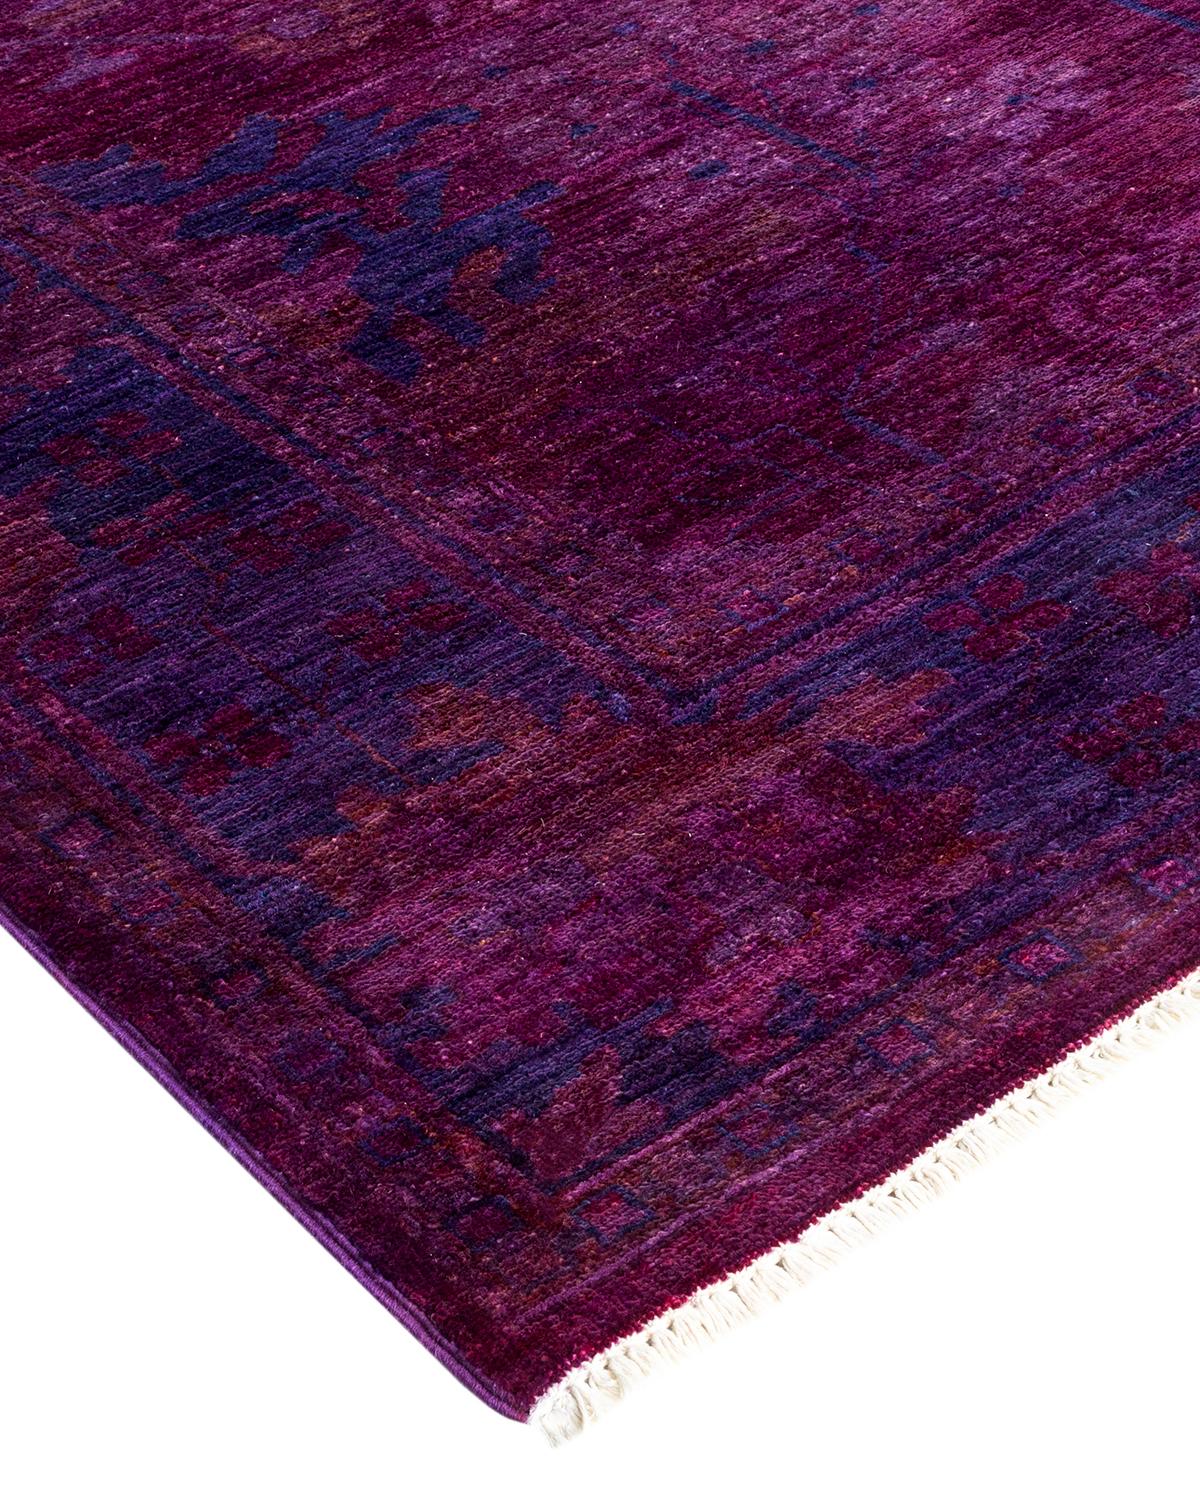 Vibrance rugs epitomize classic with a twist: traditional patterns overdyed in brilliant color. Each hand-knotted rug is washed in a 100% natural botanical dye that reveals hidden nuances in the designs. These are rugs that transcend trends, and